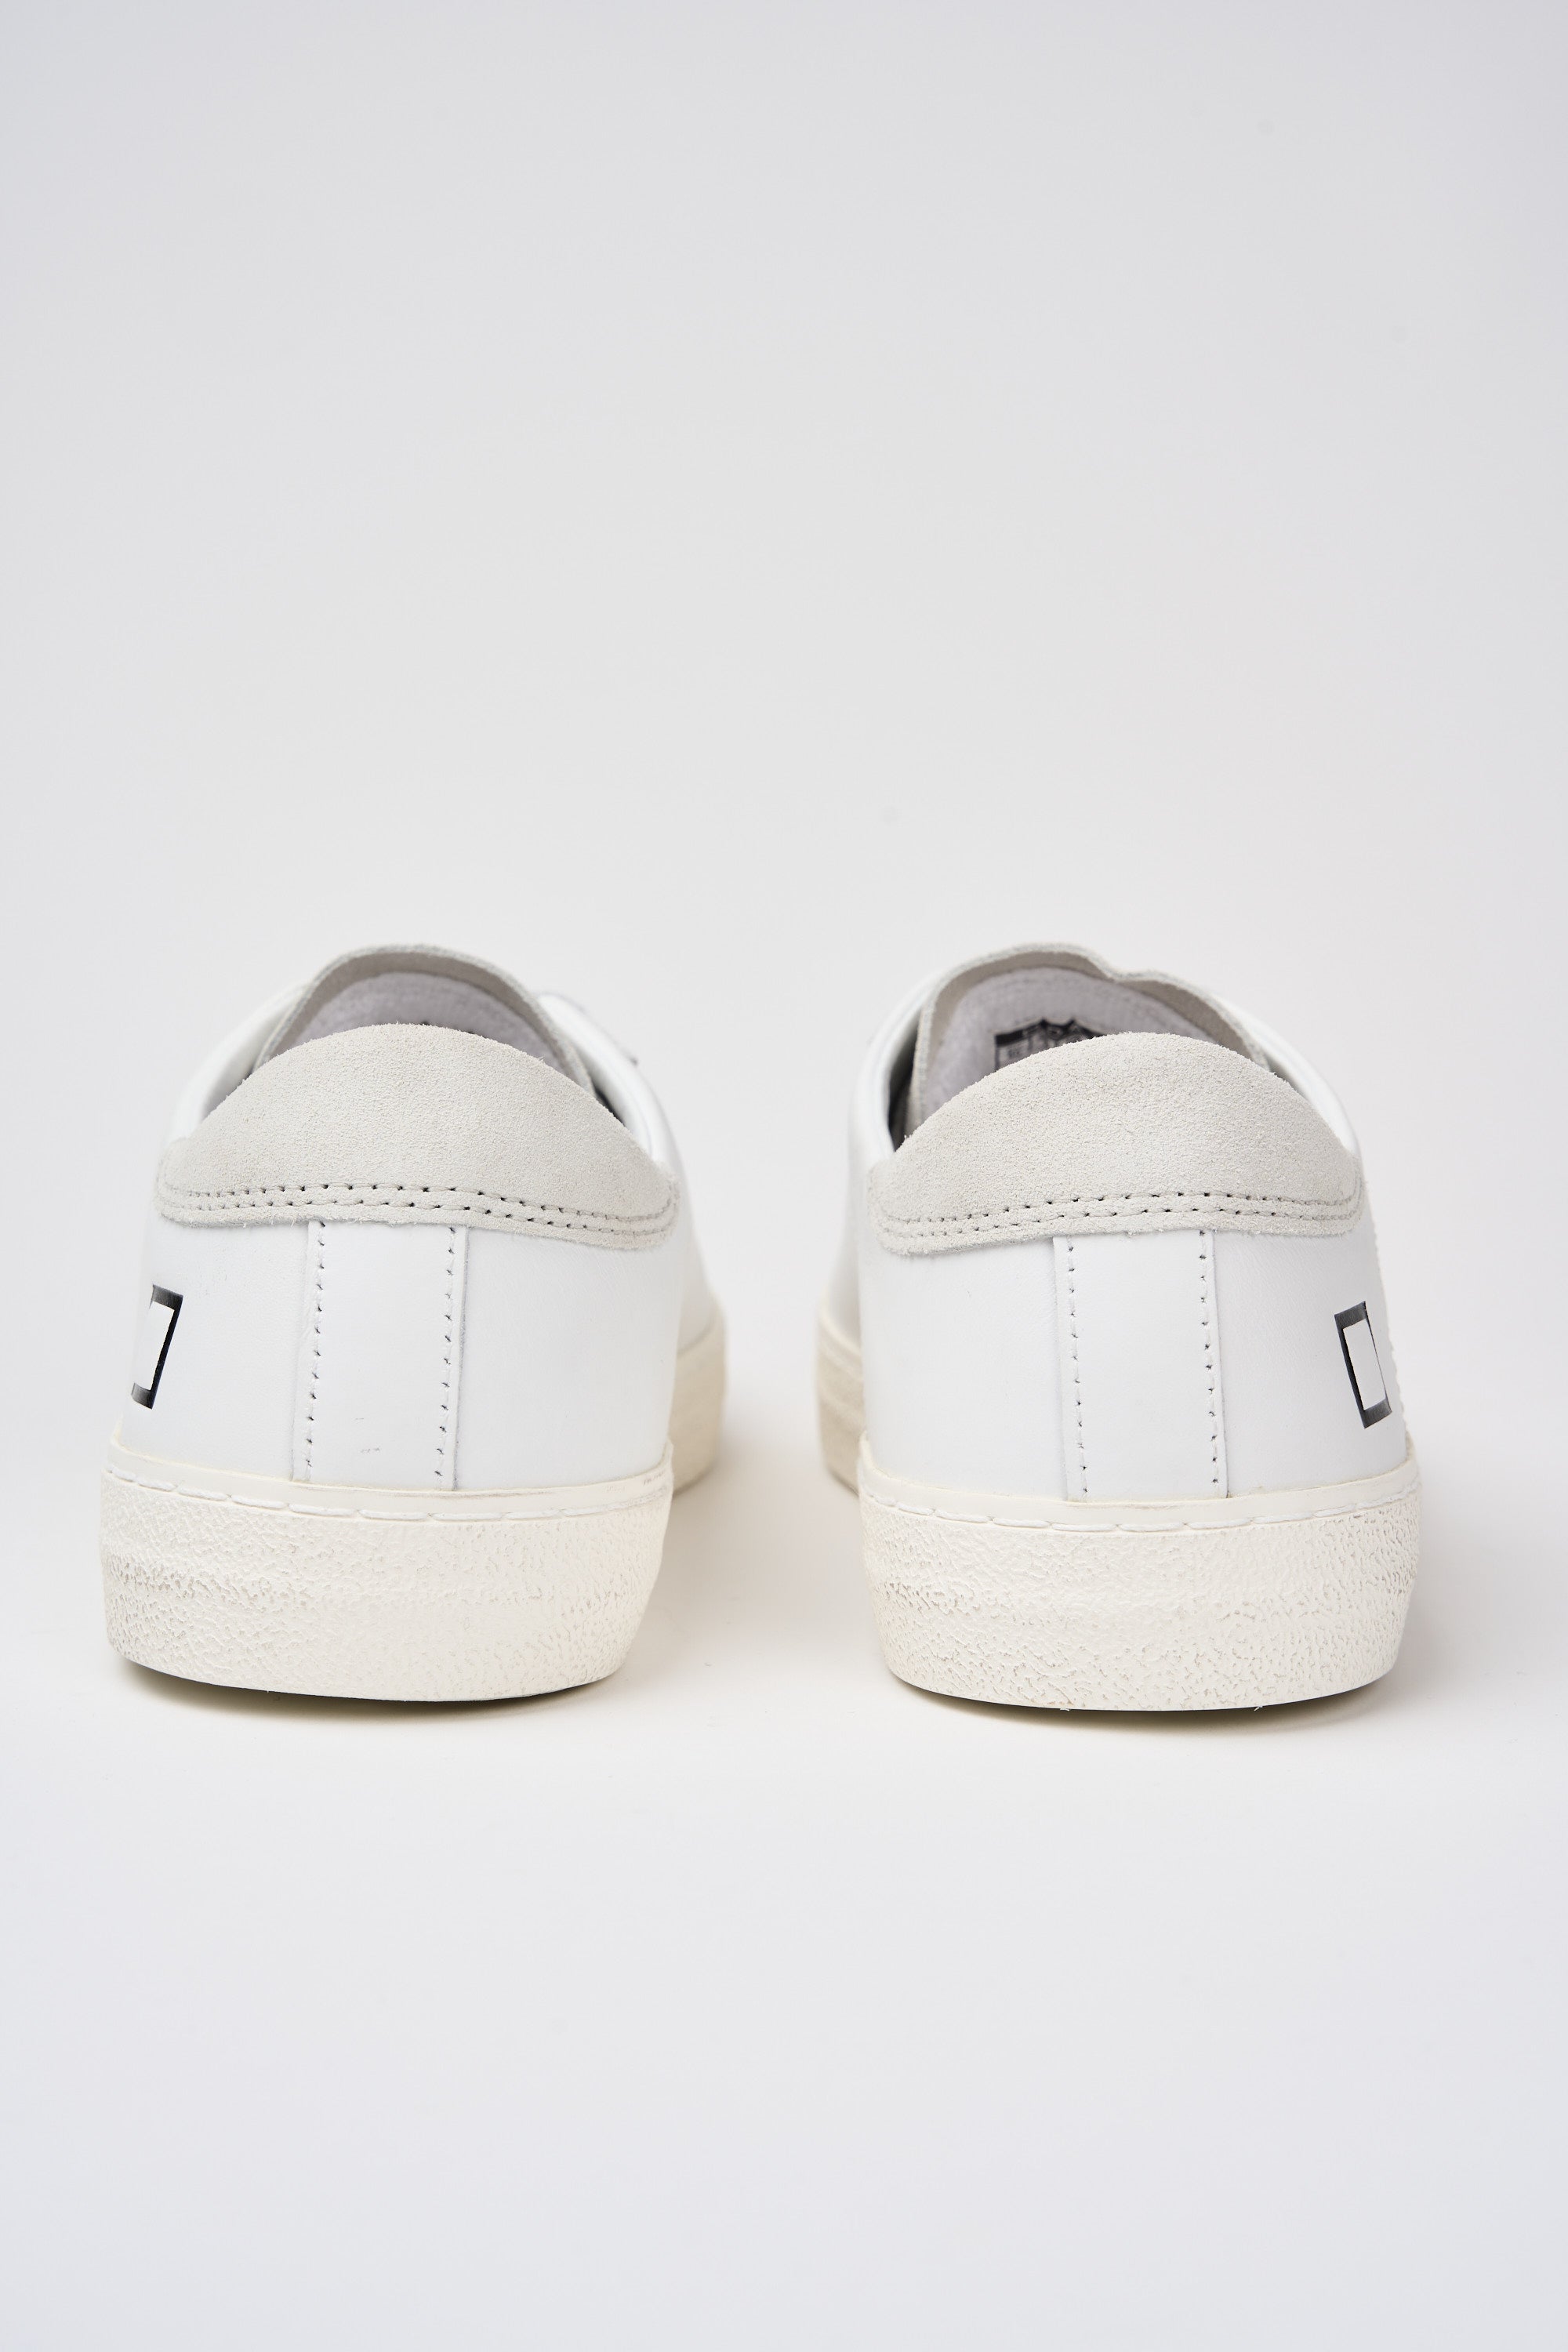 D.A.T.E. Sneaker Hill Low Vintage Leather/Suede White-6